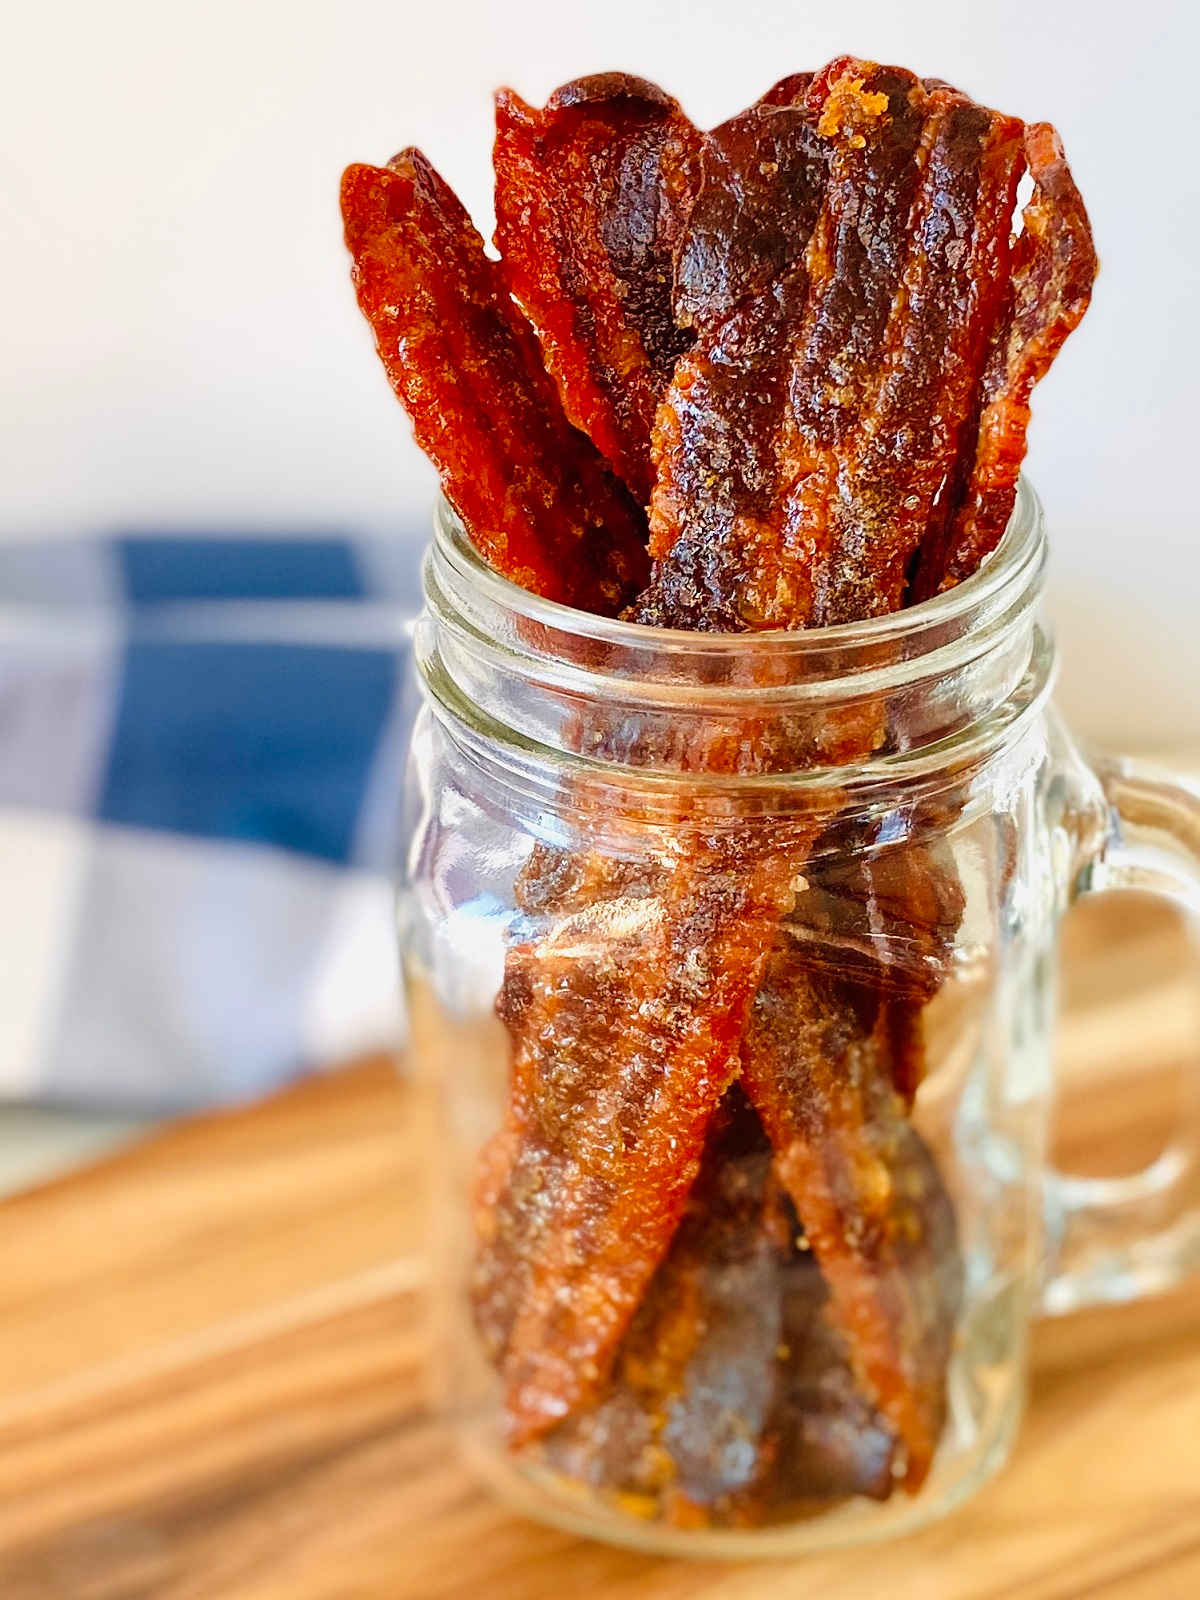 candied bacon jerky sitting upright in glass jar with blue napkin in background